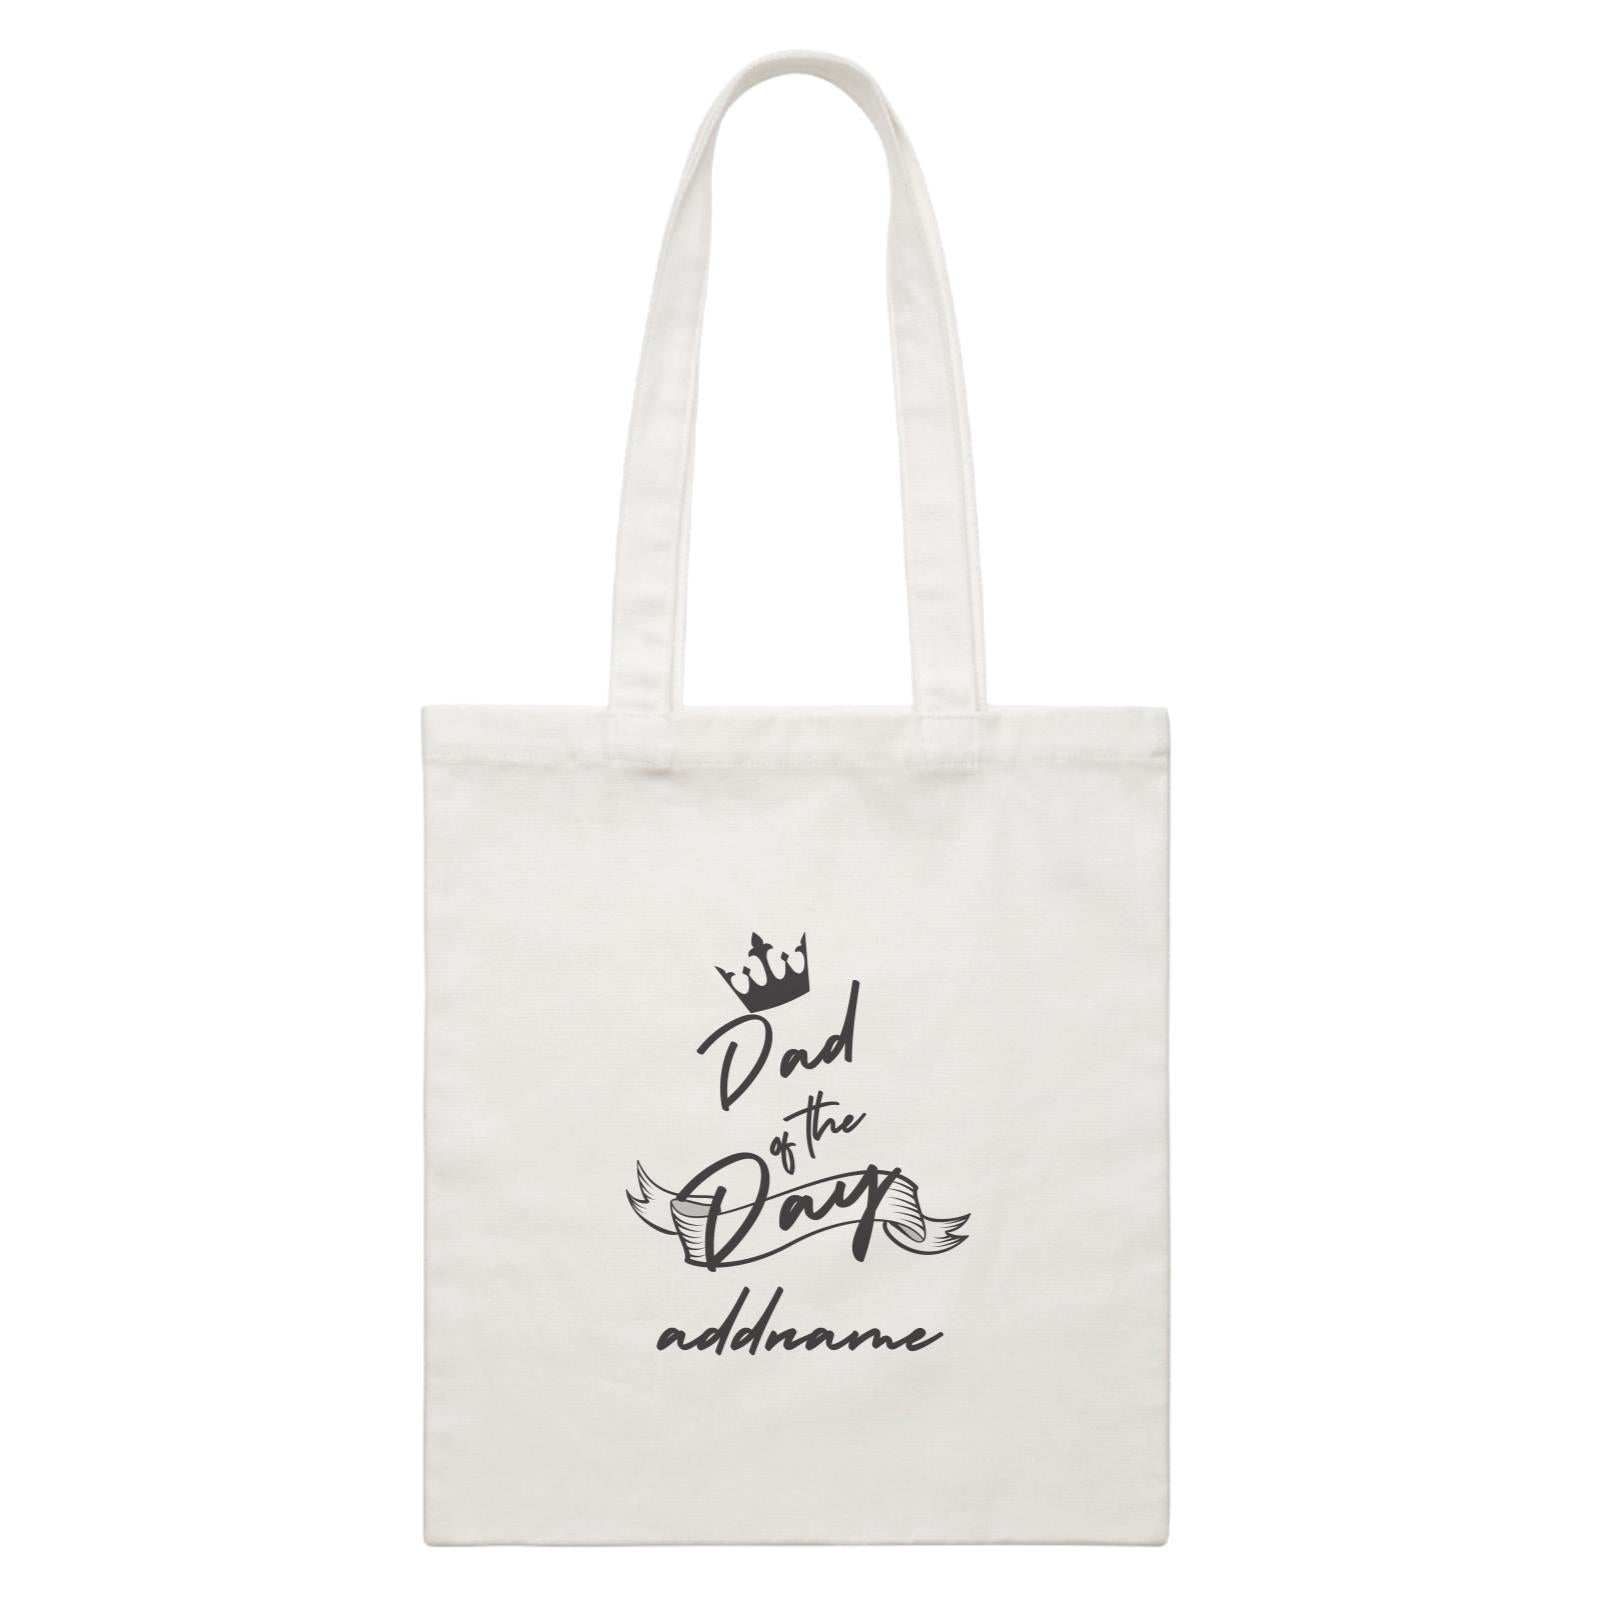 Birthday Typography Dad Of The Day Addname White Canvas Bag